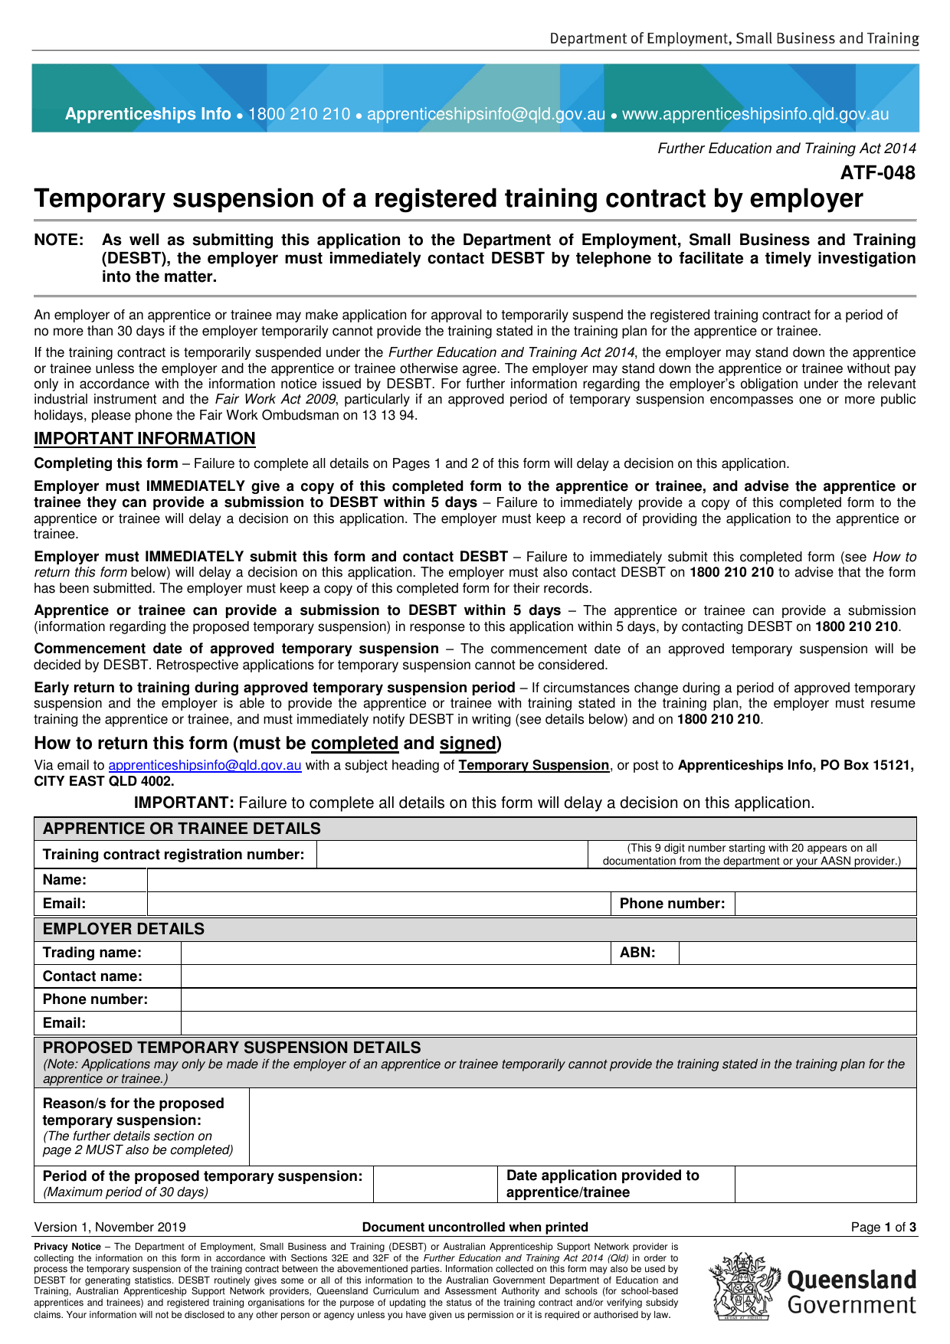 Form ATF-048 Temporary Suspension of a Registered Training Contract by Employer - Queensland, Australia, Page 1